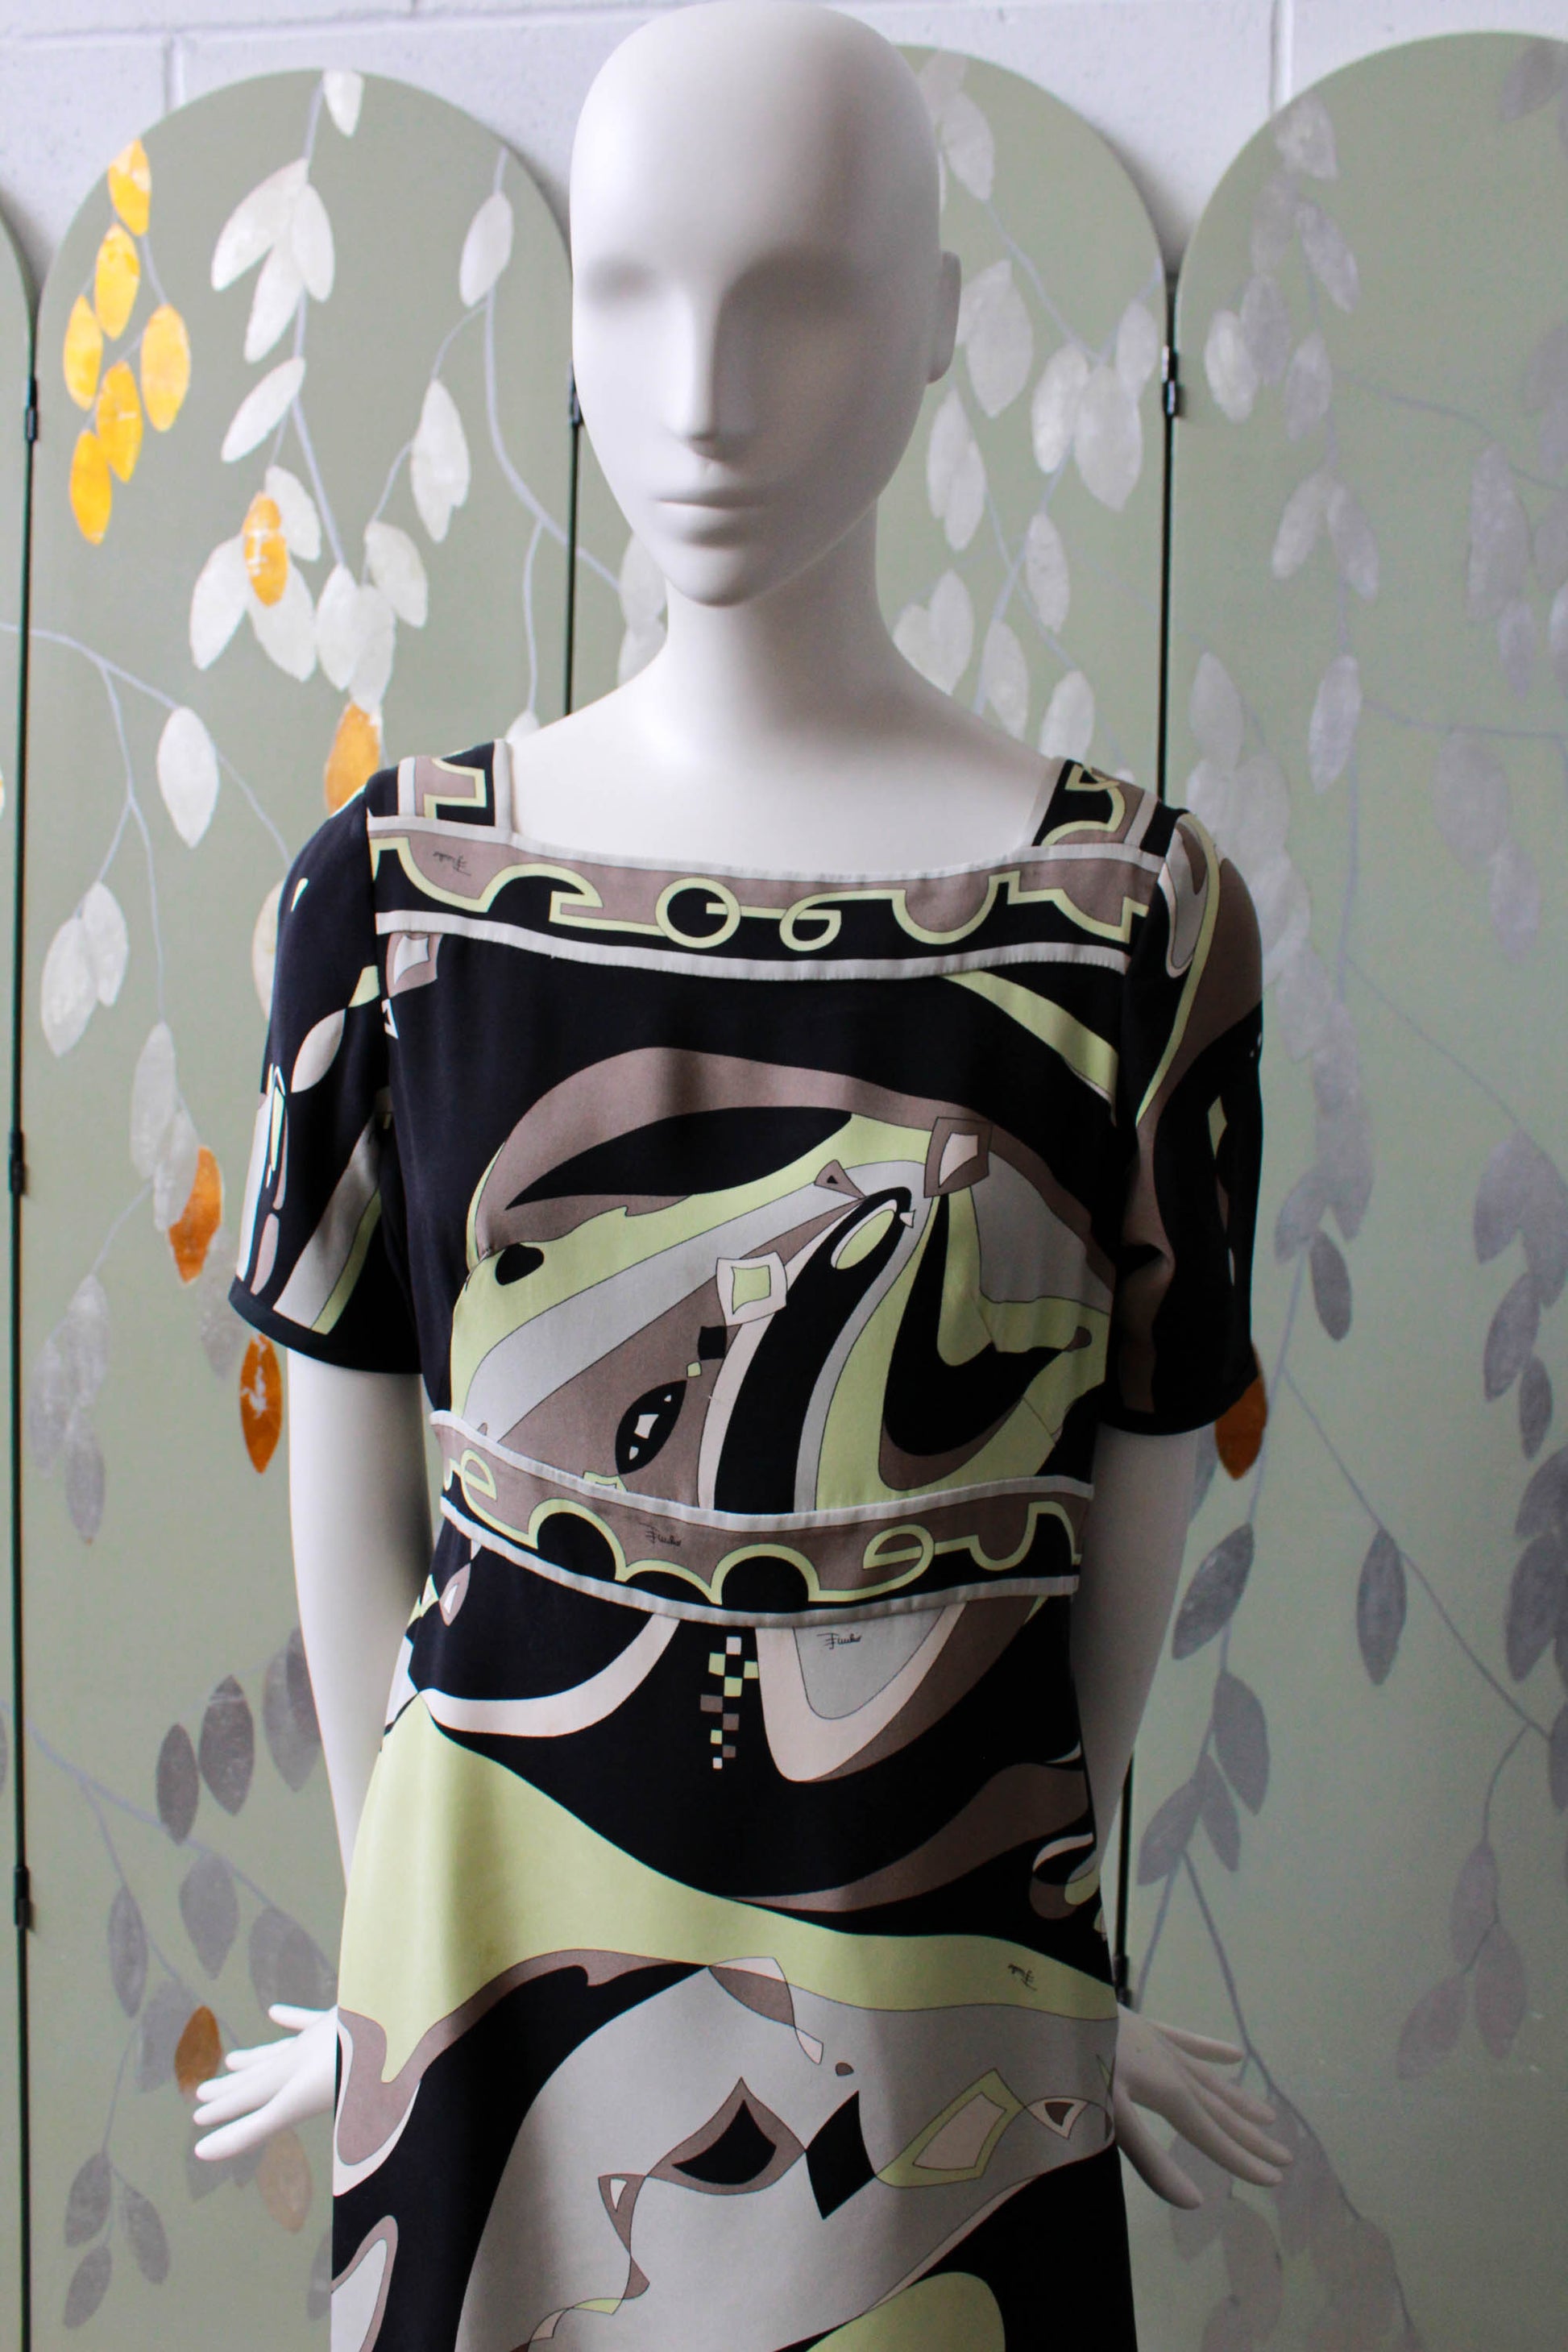 EMILIO PUCCI: dress for woman - Green